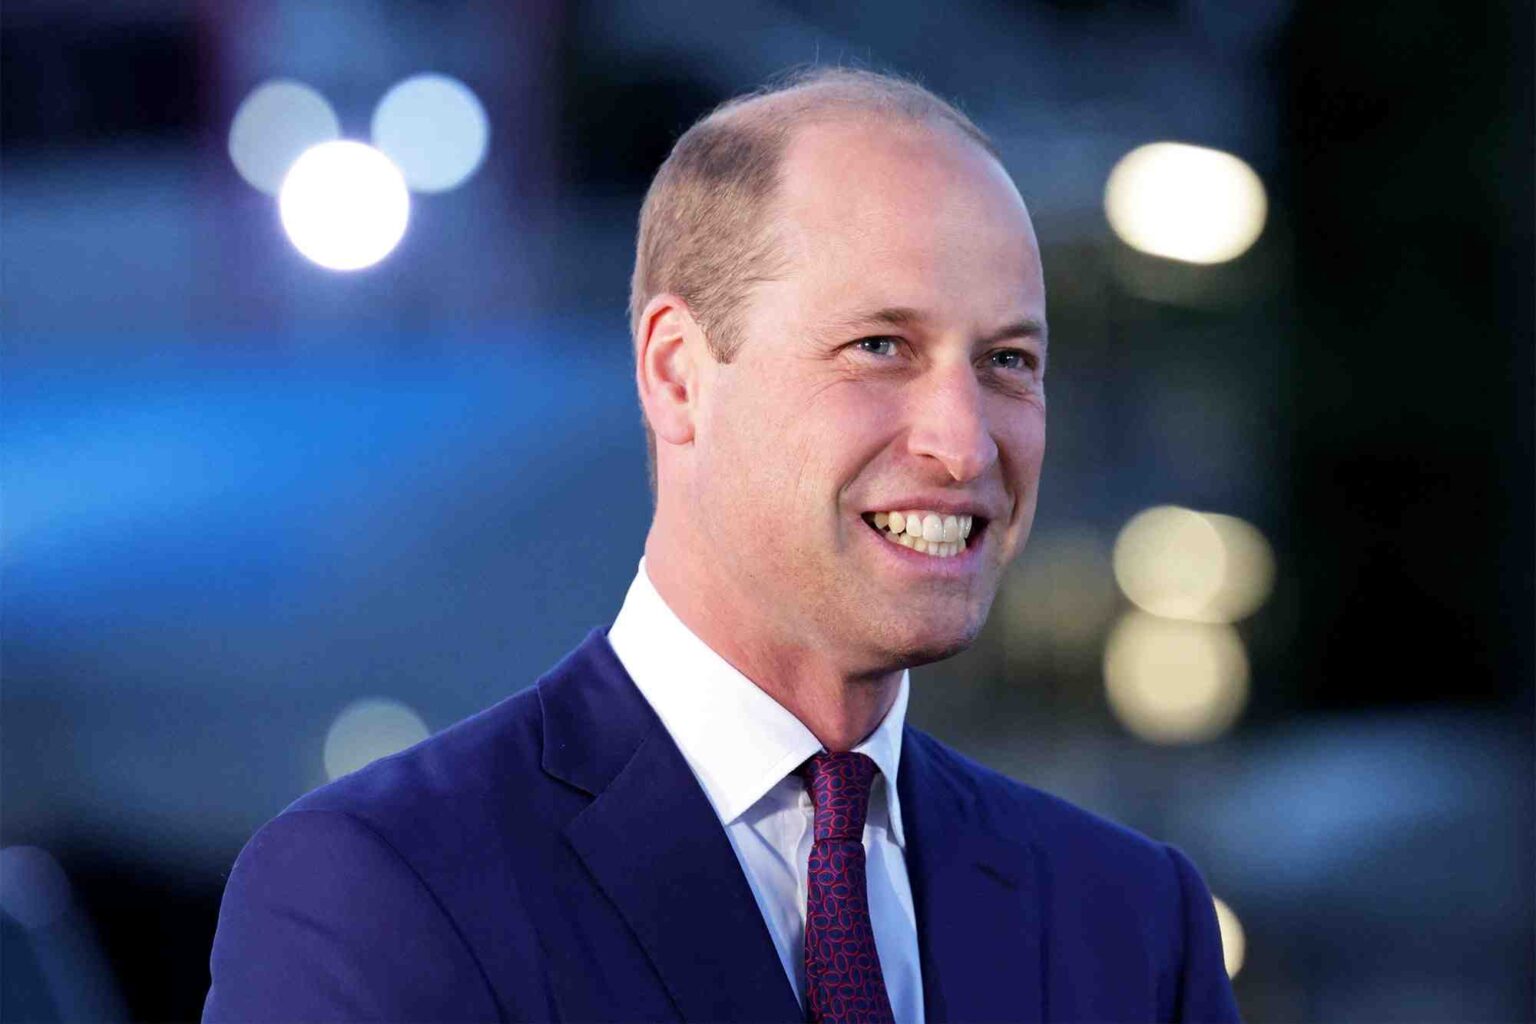 Dive into the royal rumble of "prince william meghan and harry". Is it a sibling feud or media hype? Judge for yourself in our juicy exposé.